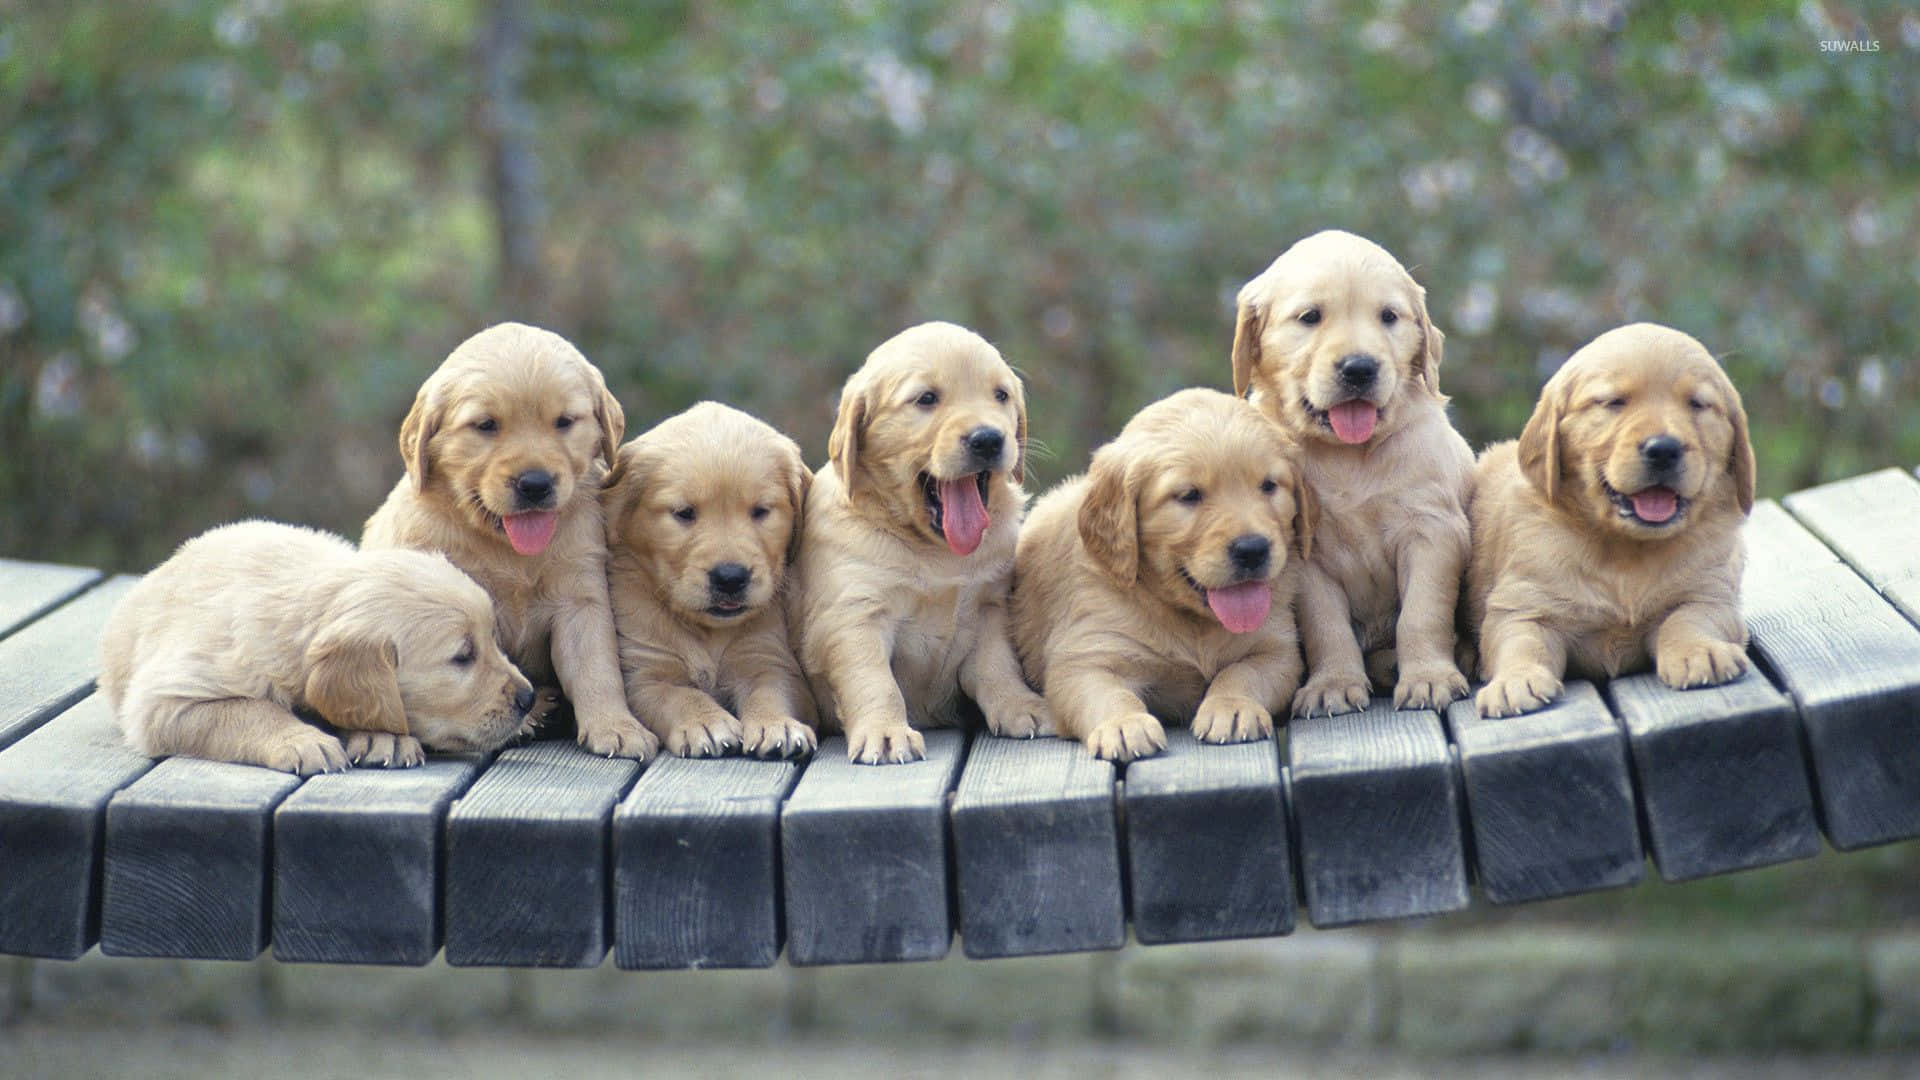 Adorable Puppies Enjoying a Relaxing Day